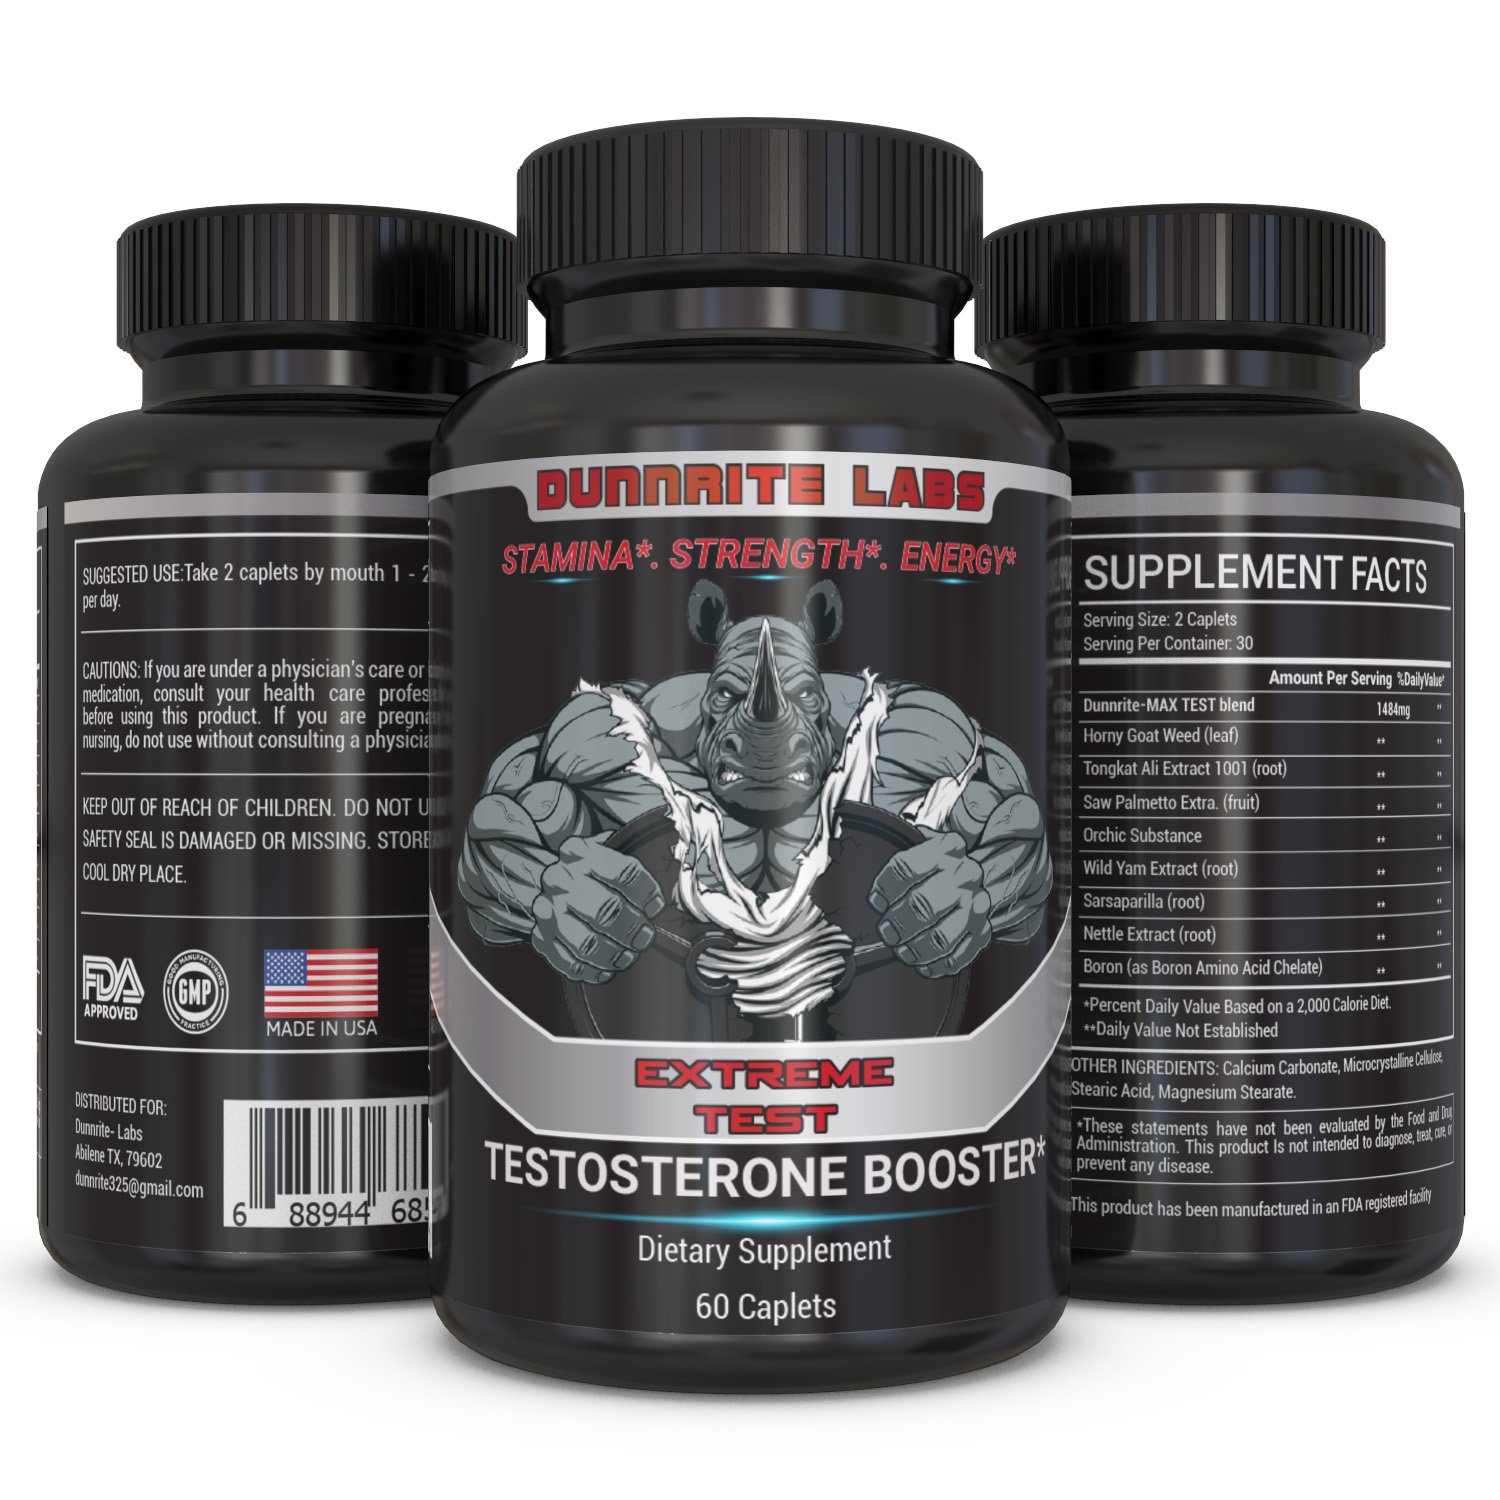 Why you need to take testosterone boosters.